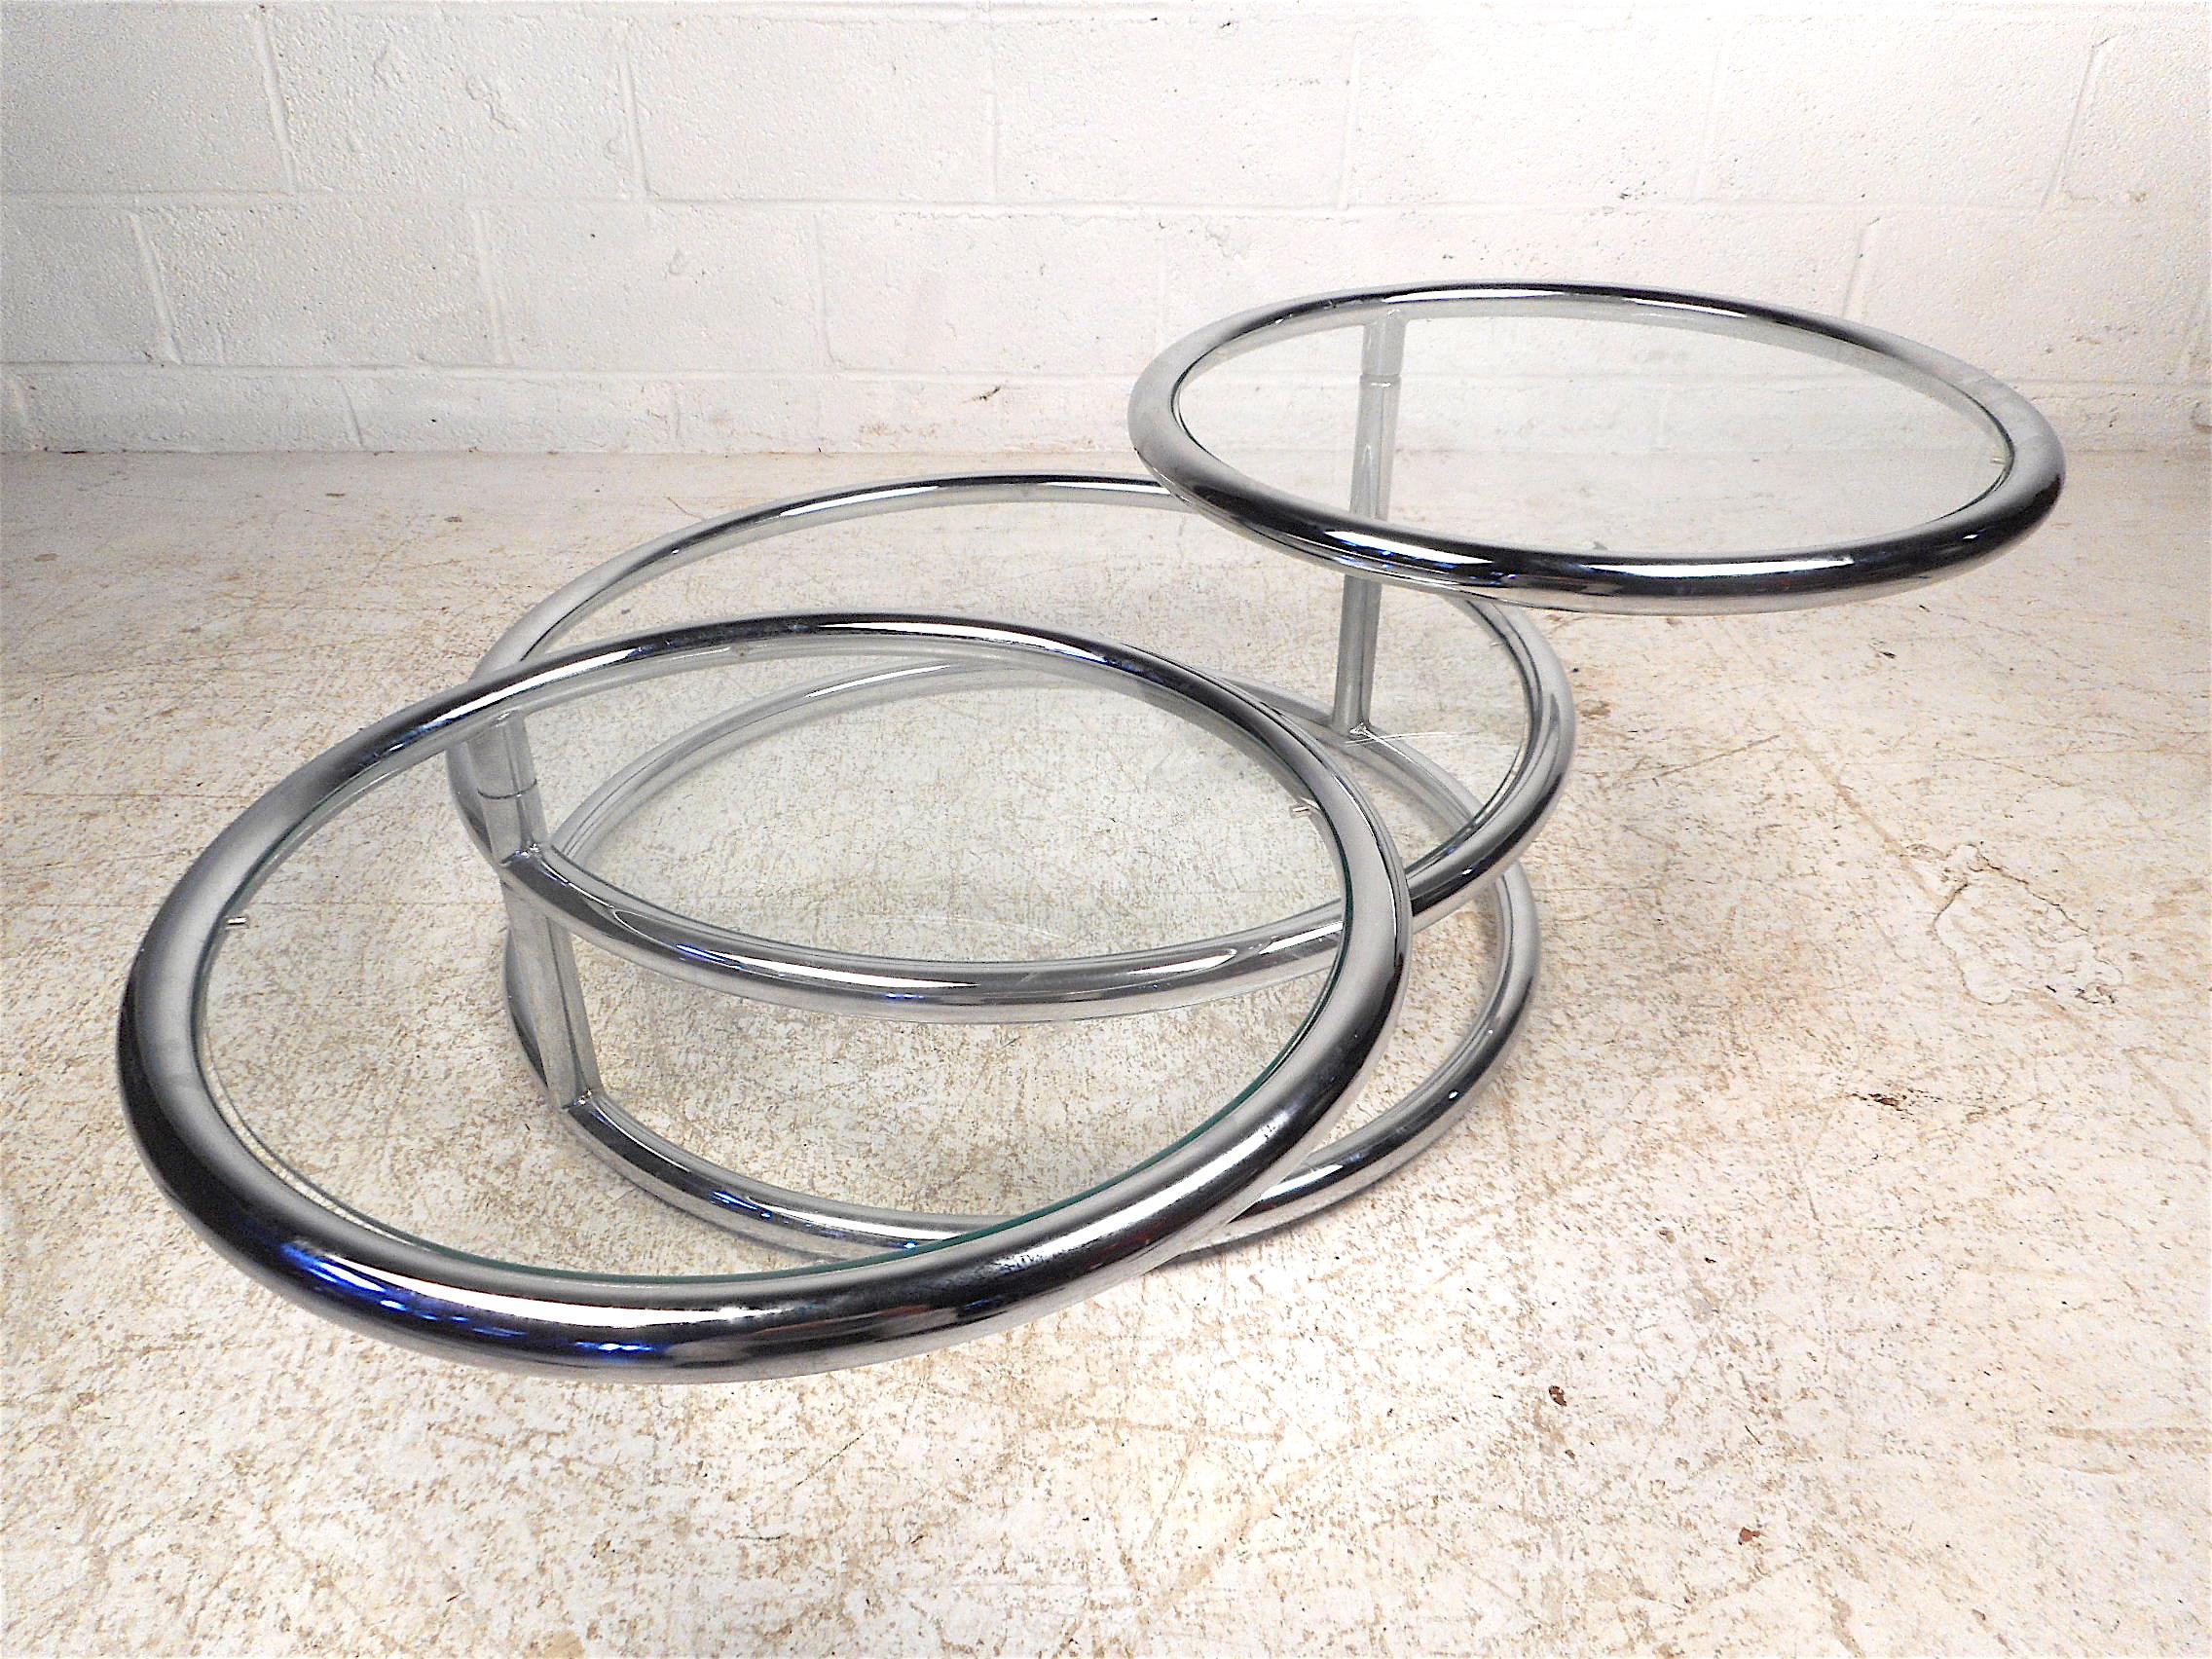 Very unusual vintage modern three-tier coffee/cocktail table. Chrome frame with three circular glass inserts which serve as tabletops. The two smaller tiers swivel allowing for an increased table surface. Interesting addition to any modern interior.